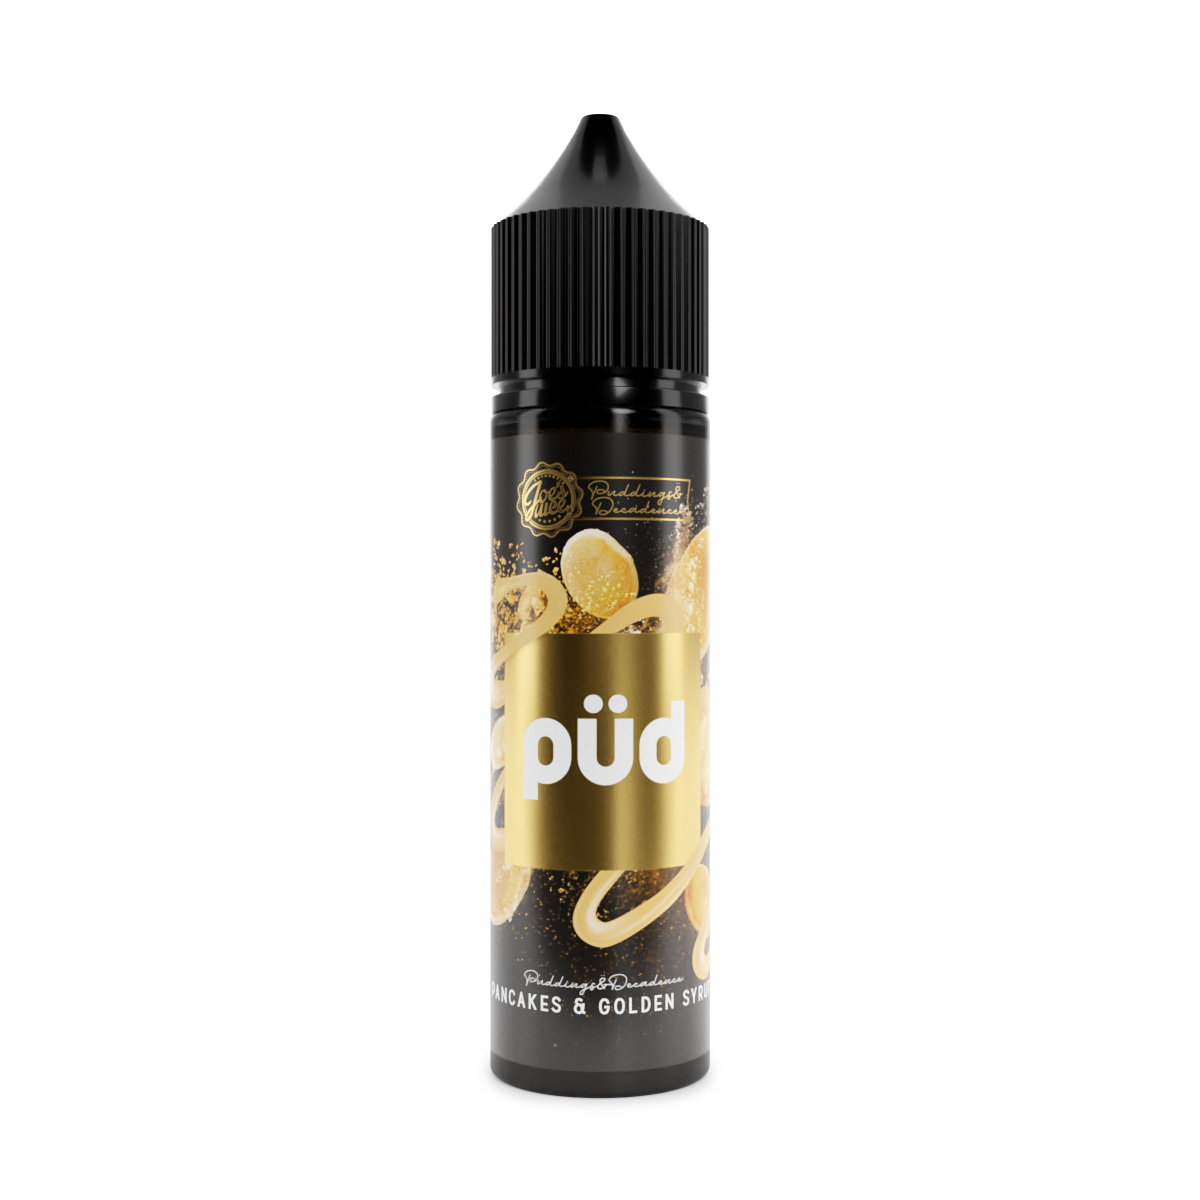 PUD - Pancakes Golden Syrup Flavour Concentrate by Joe's Juice